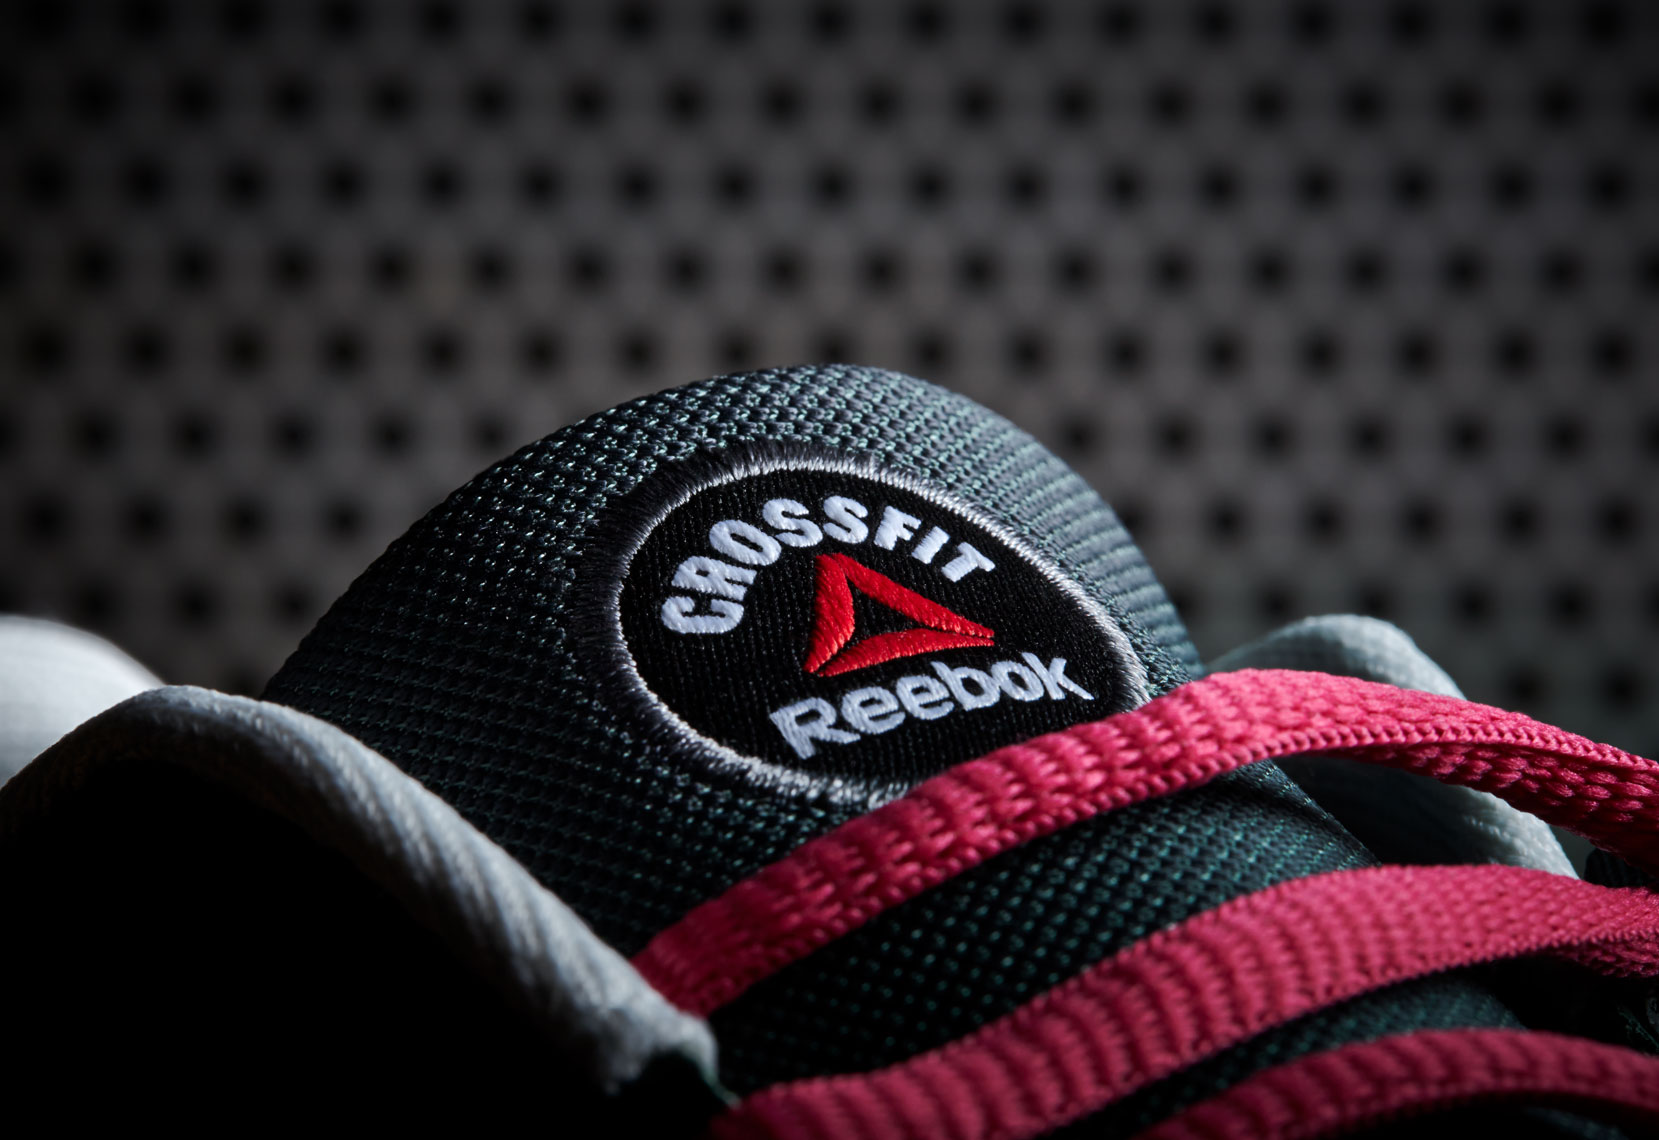 Product Photography Gear Reebok Crossfit Olympic Weight Lifting Shoes Tounge Green & Pink Denver